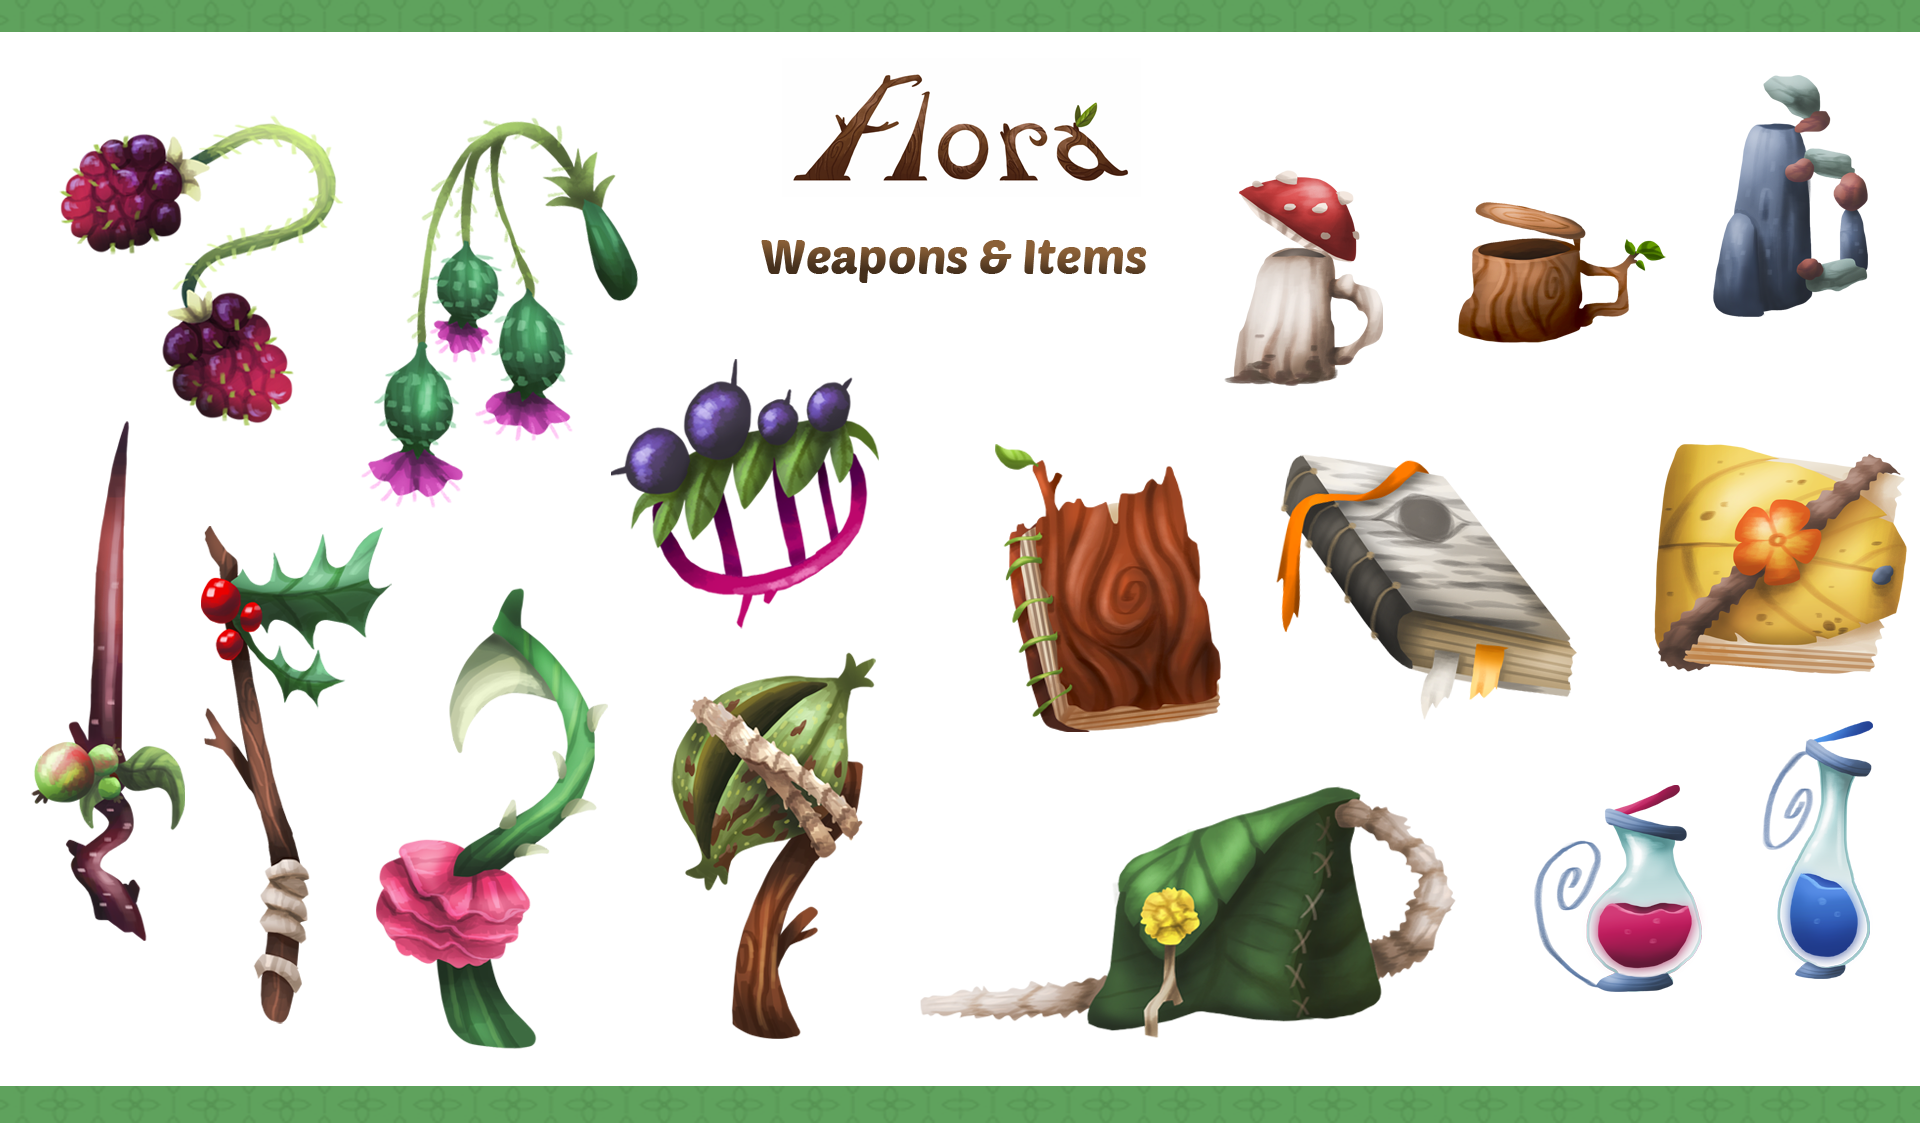 2D_Flora weapons and items.png